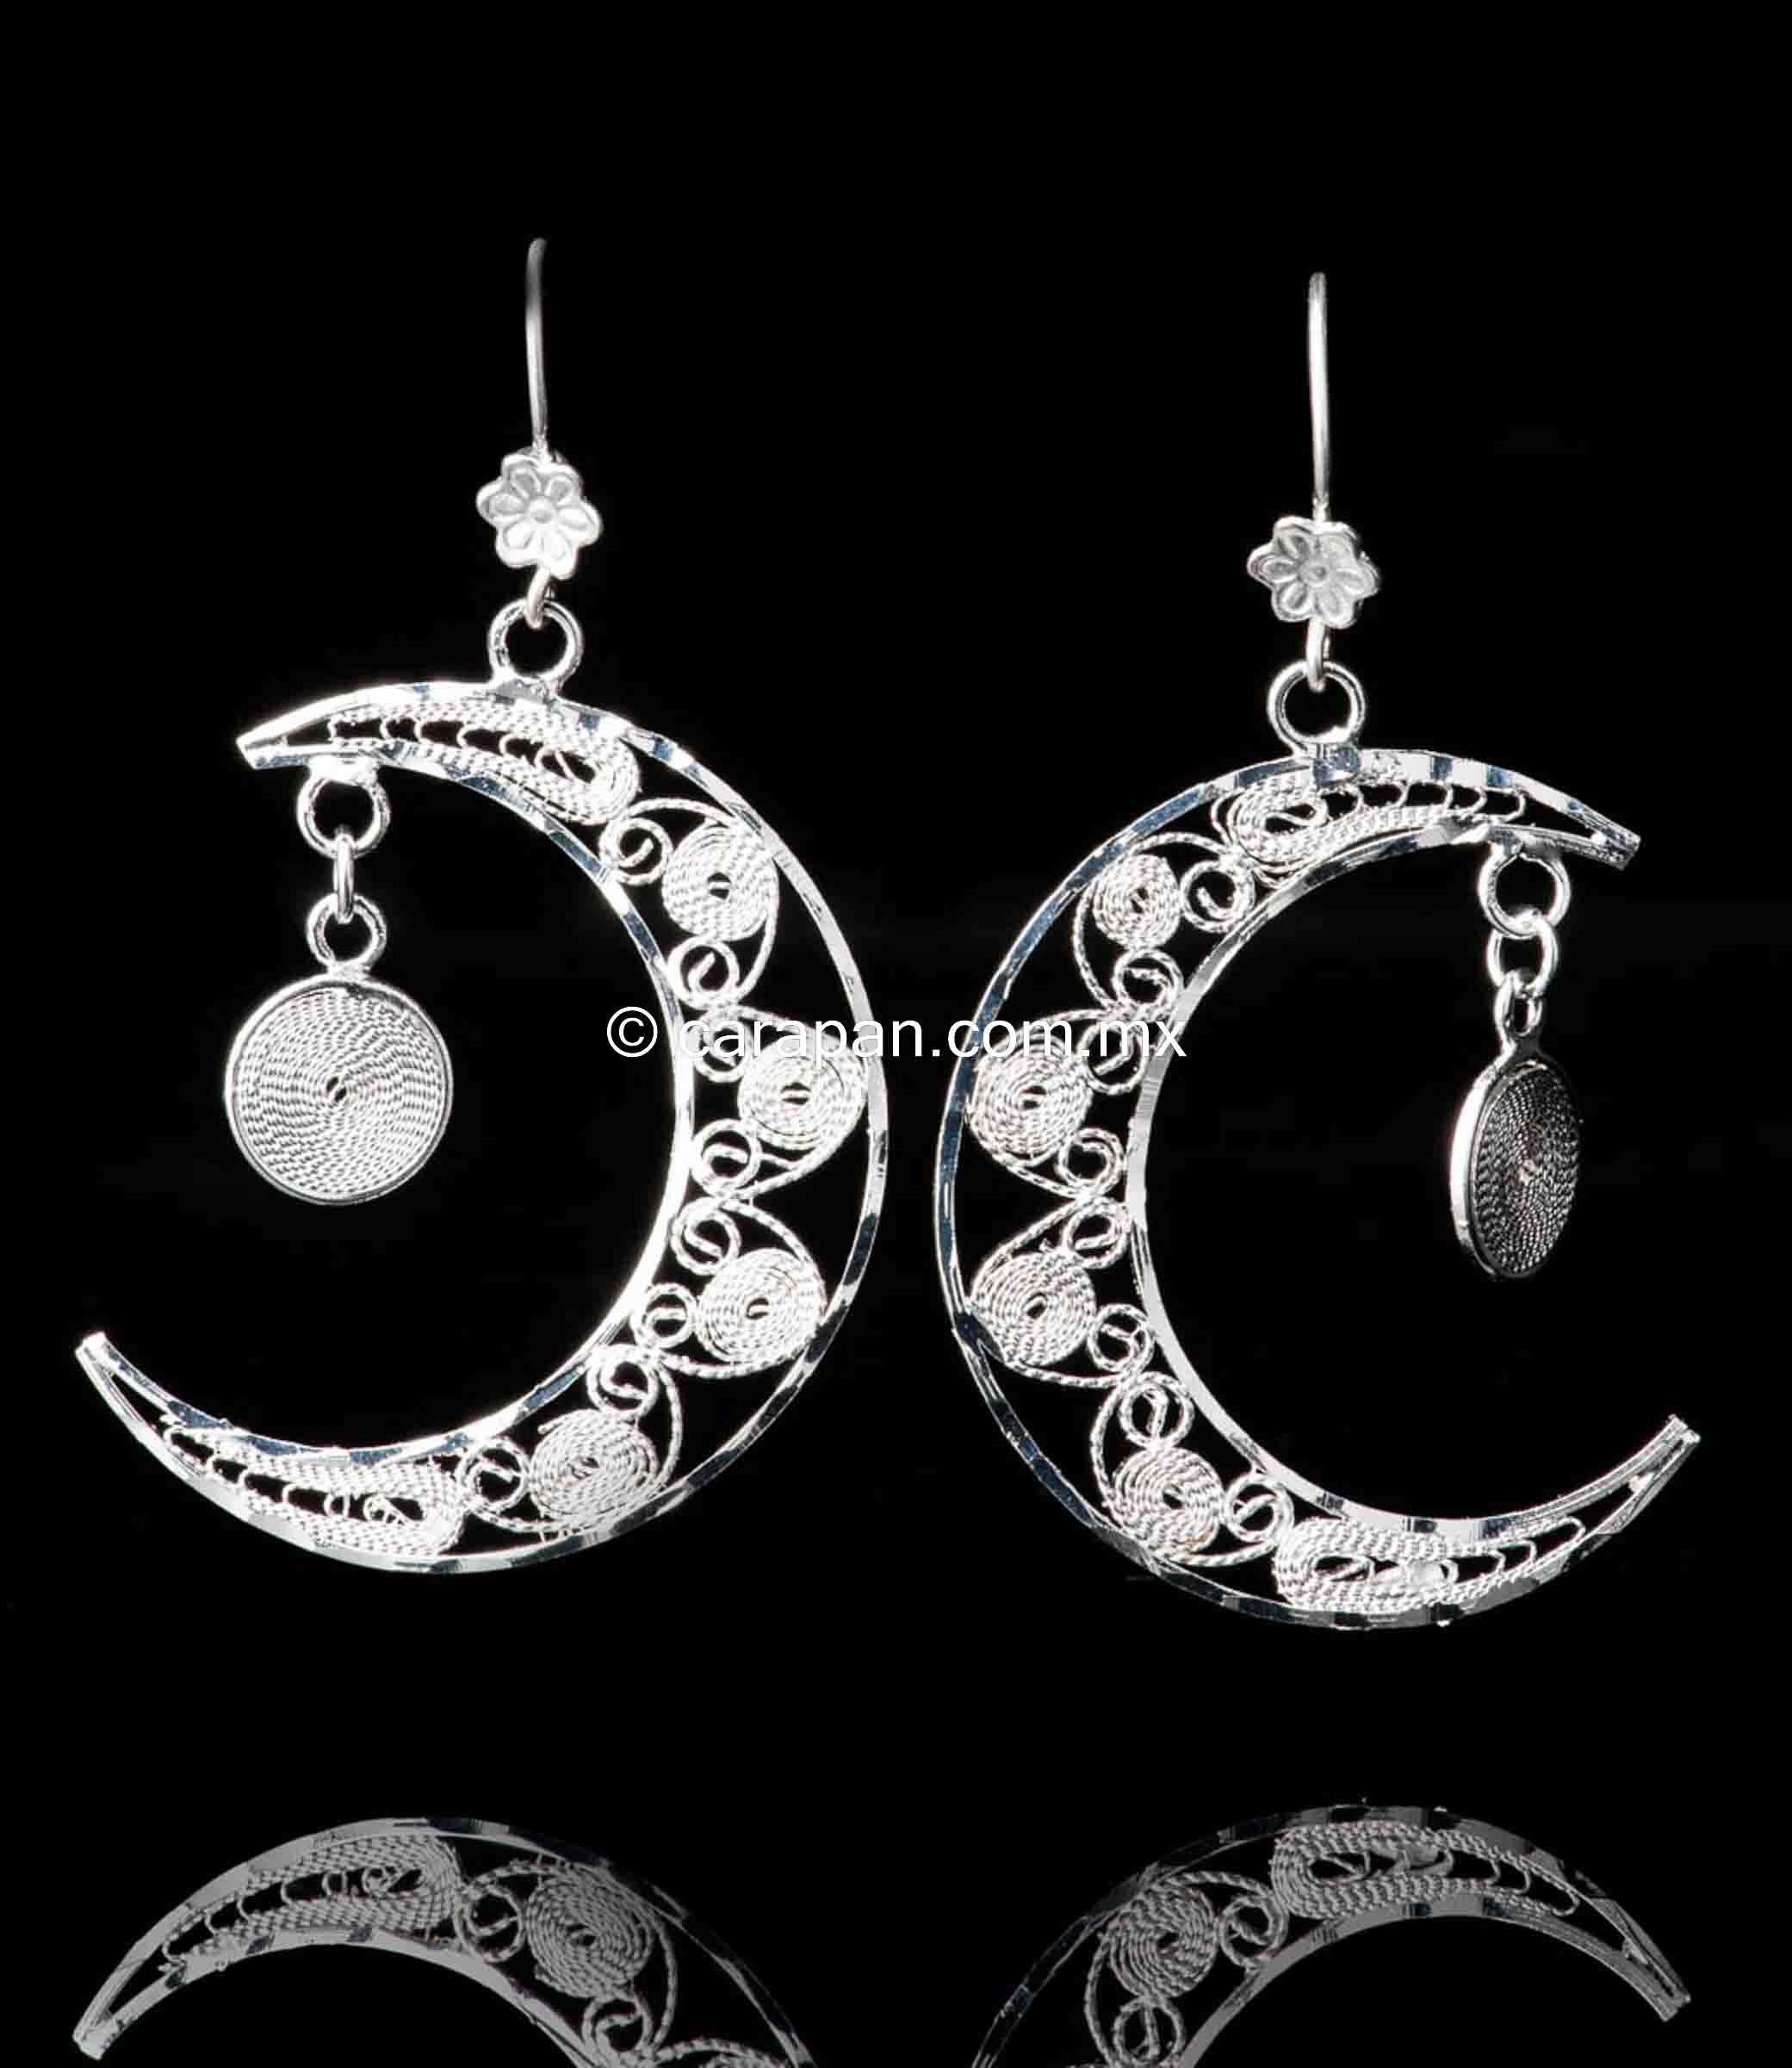 Bright Silver Filigree Mazahua Sun Earrings [EAR3285] - $170.00 : Mexico  Sterling Silver Jewelry, Proudly from Mexico to the world.